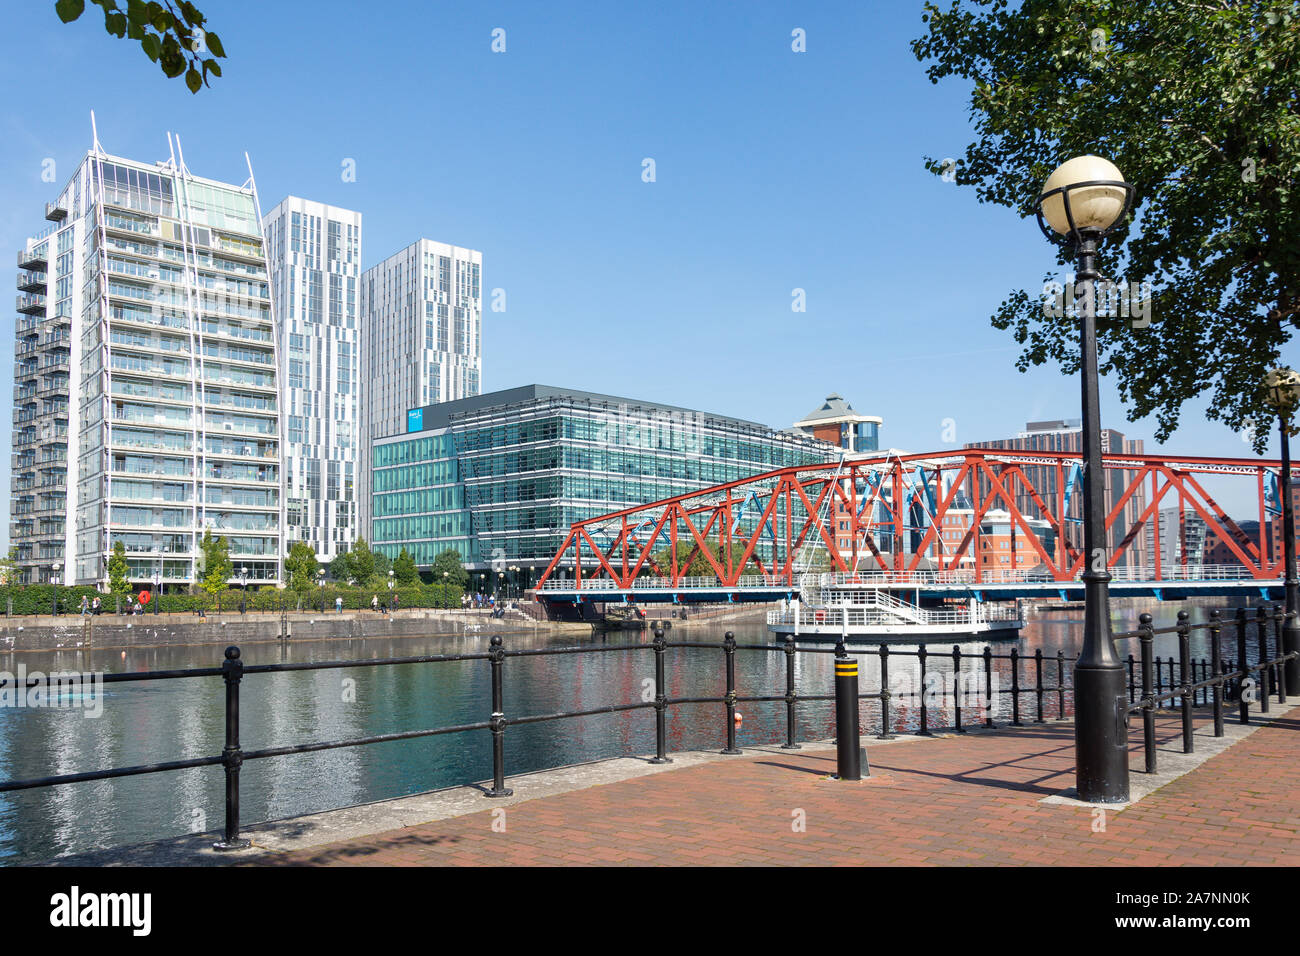 Bassin de Huron, Salford Quays, Salford, Greater Manchester, Angleterre, Royaume-Uni Banque D'Images